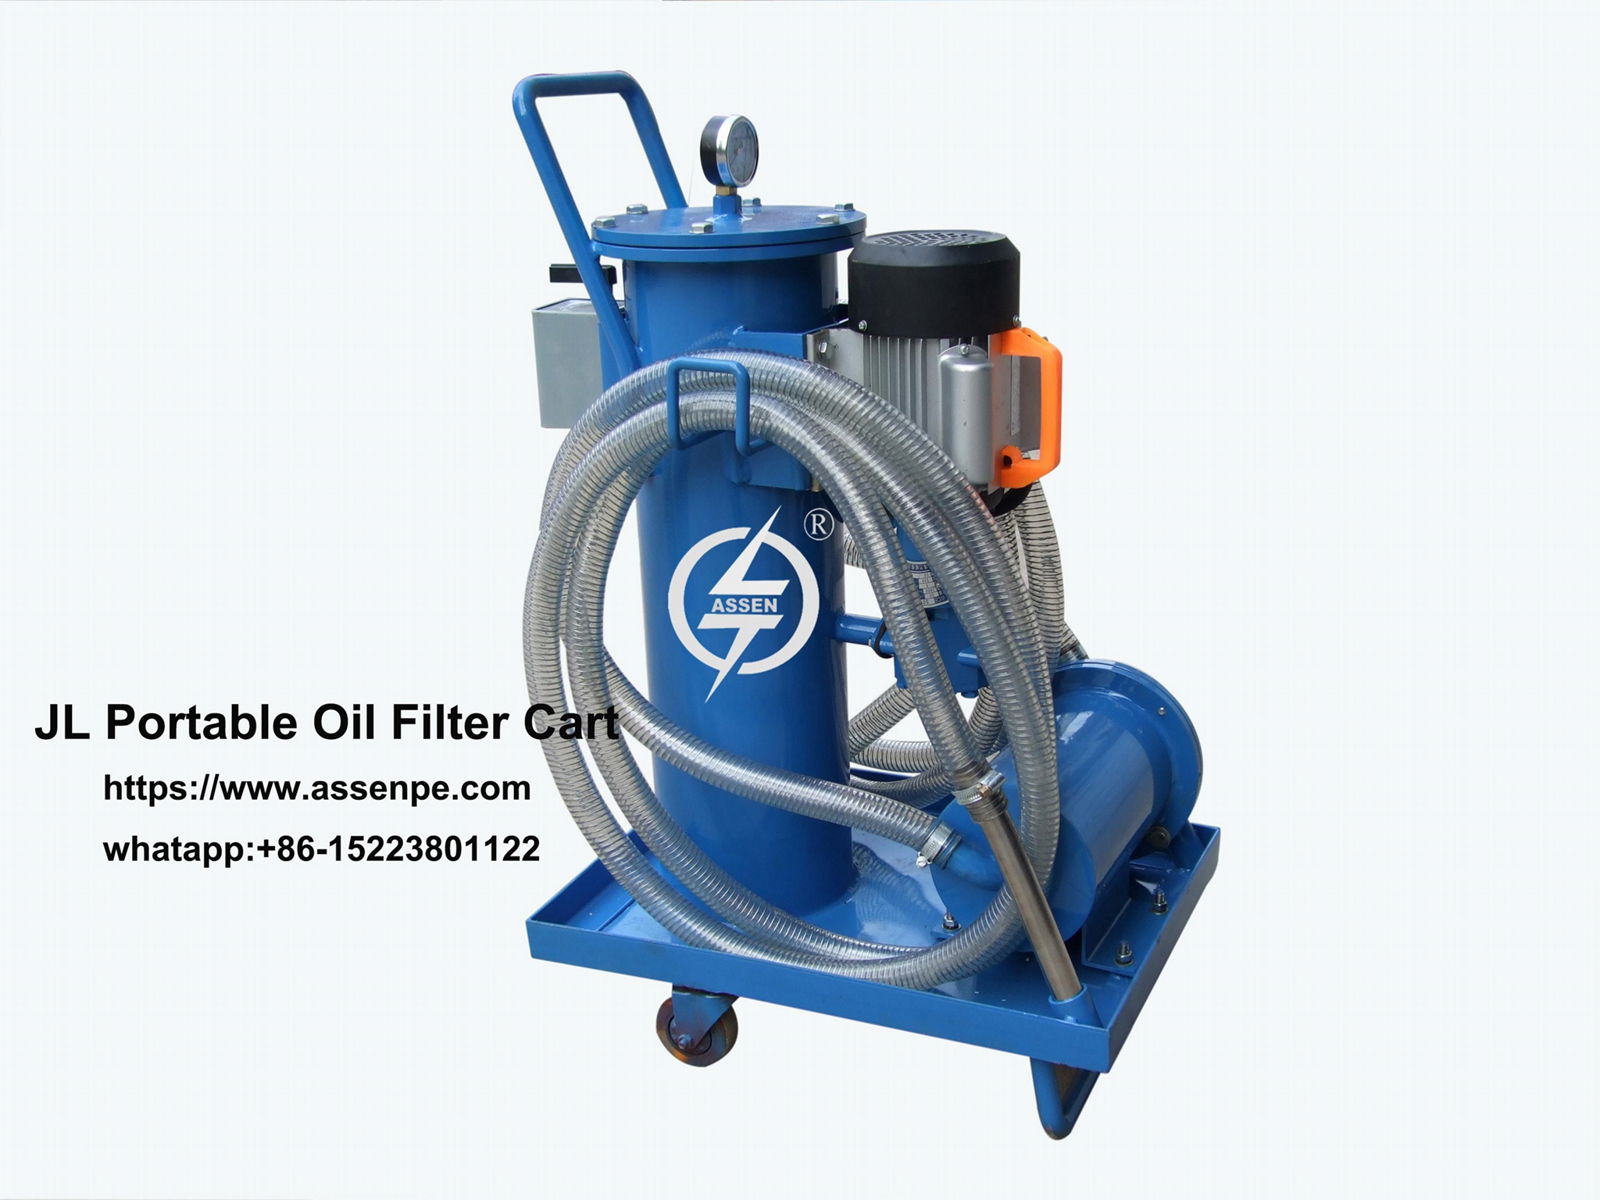 Portable Hydraulic Oil Filtration Machine, Mobile Oil Filter Cart